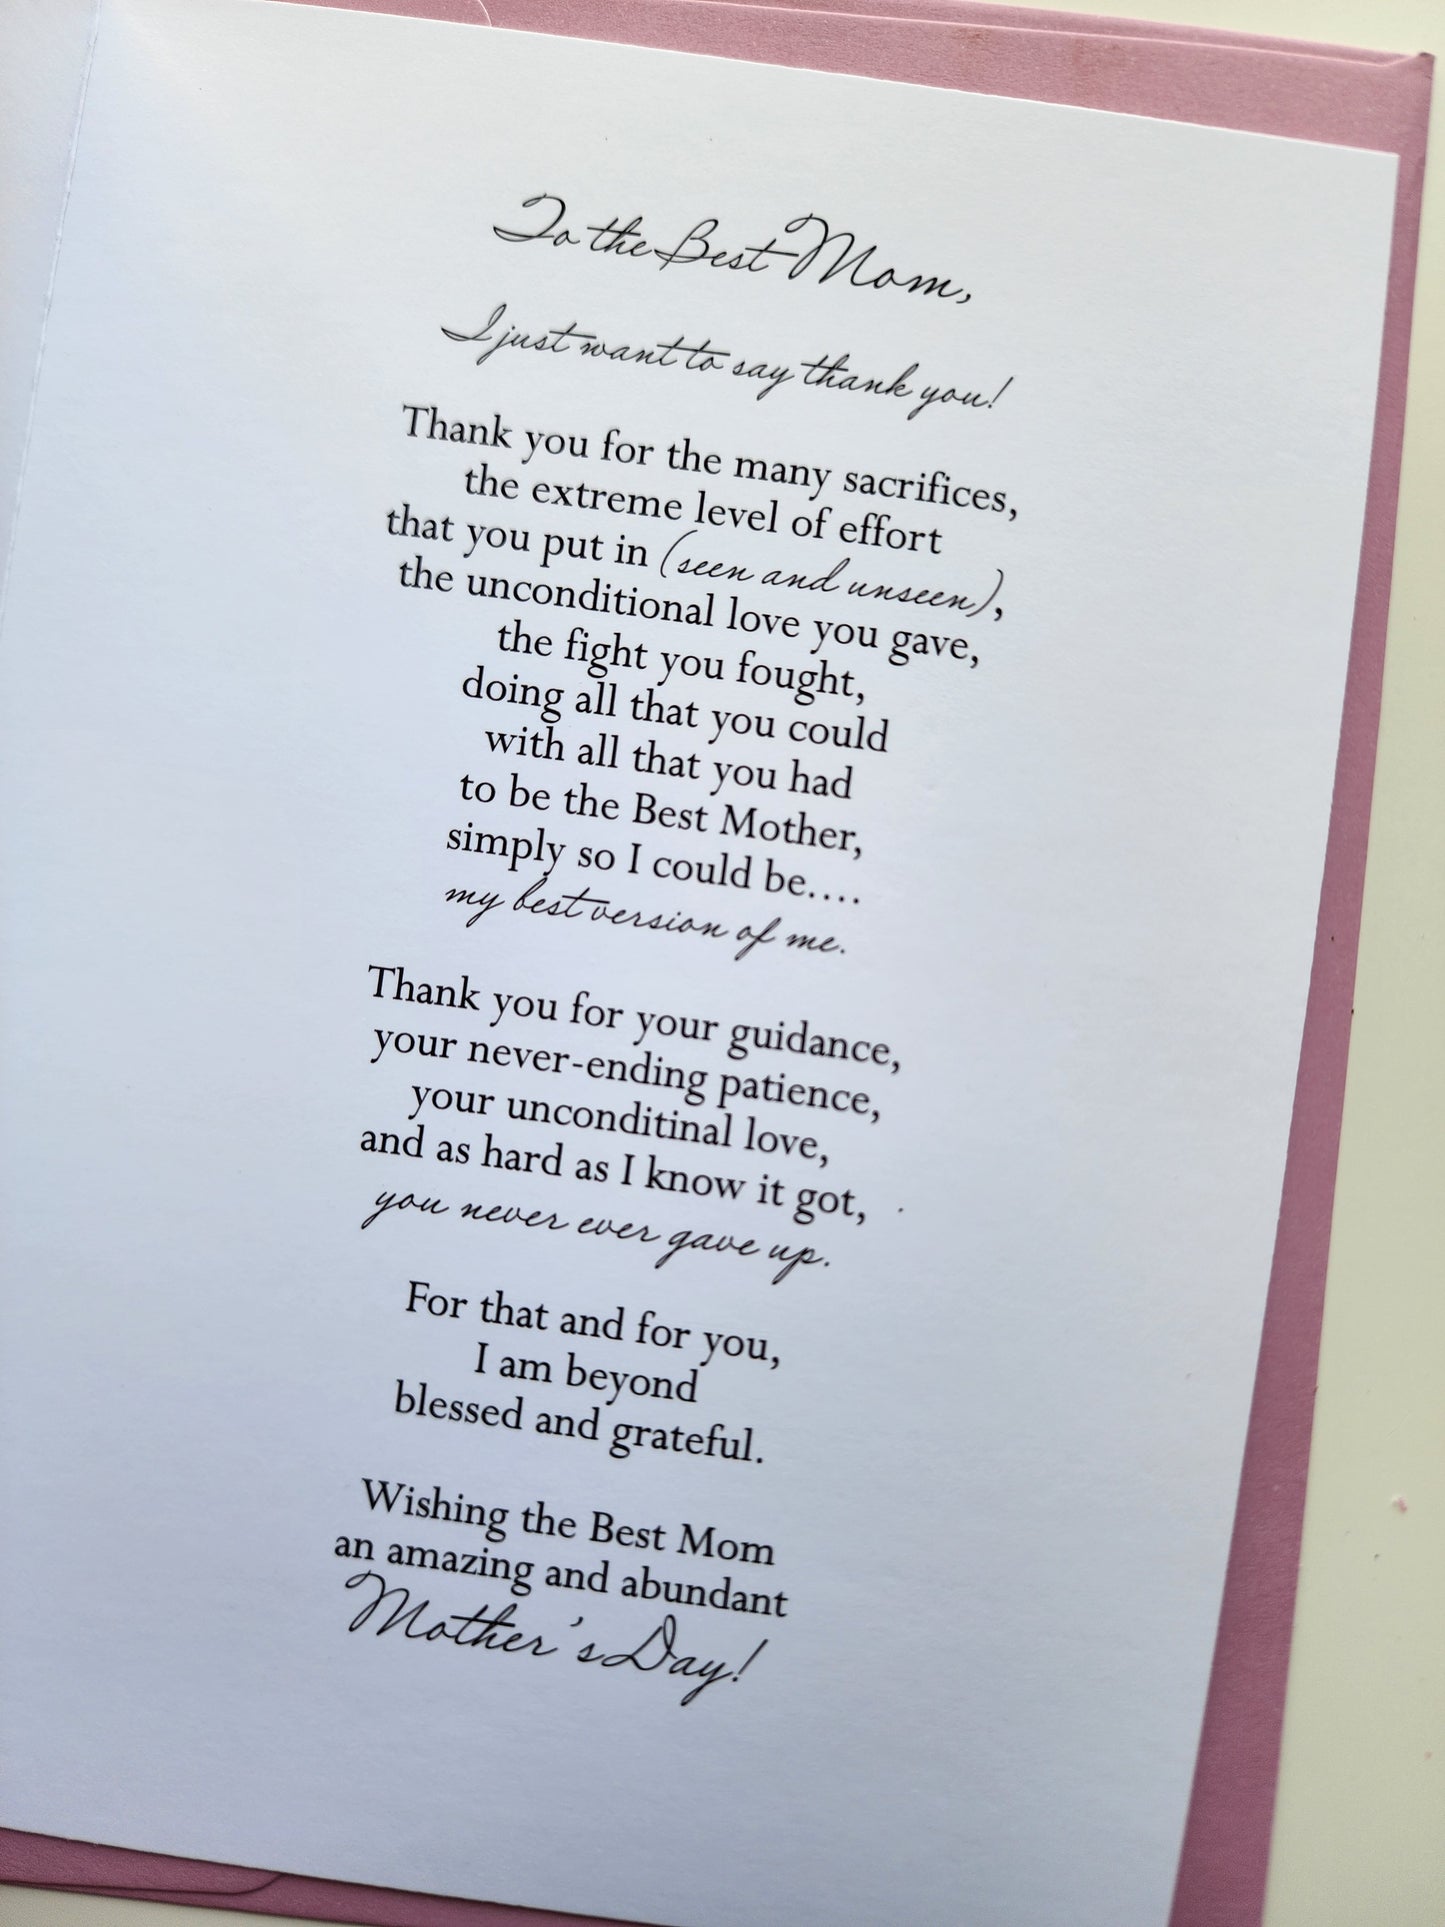 To the Best Mom - Mothers Day Greeting Card